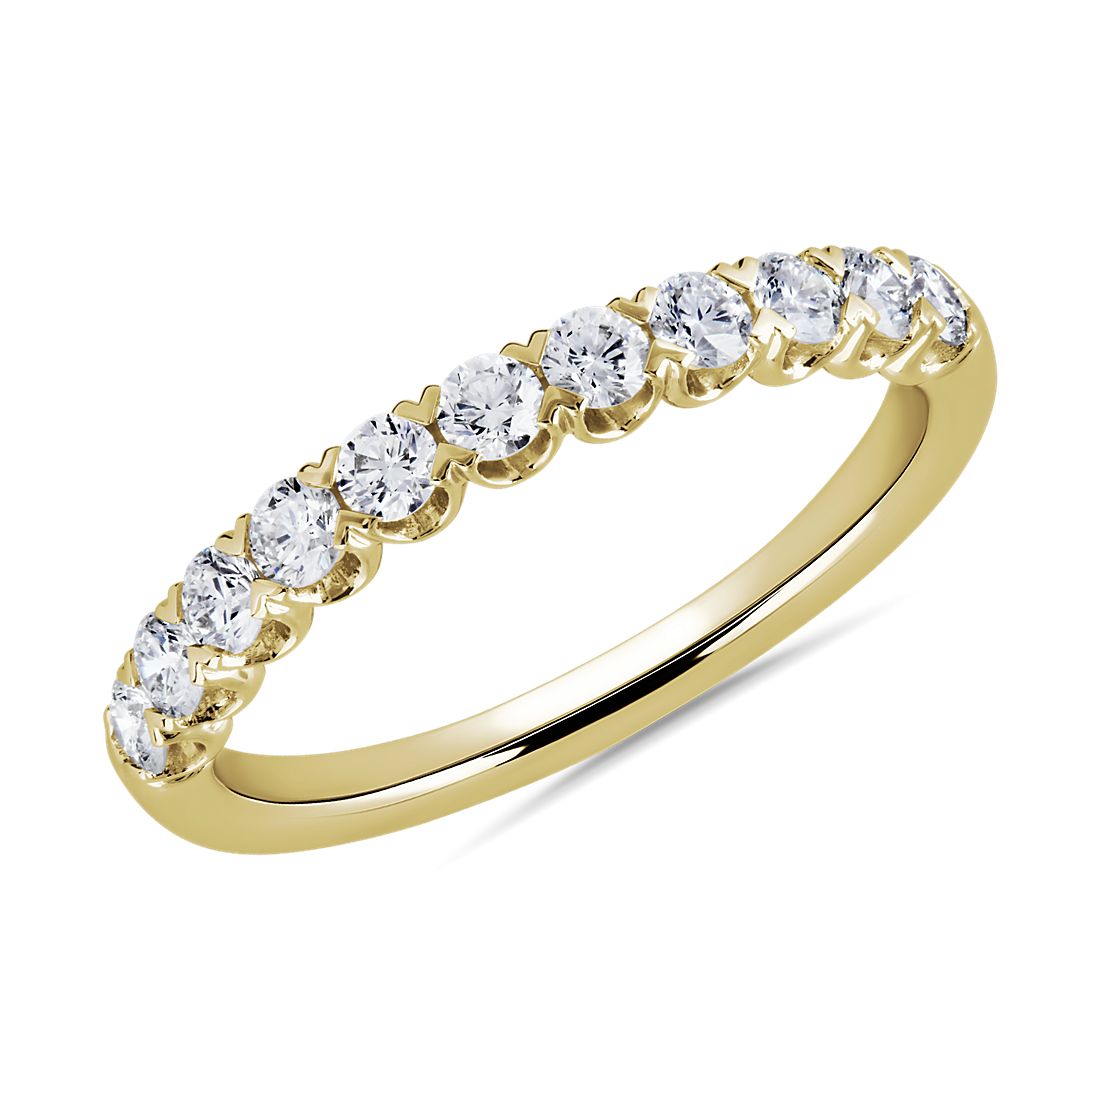 V-Claw Pavé Diamond Anniversary Ring in 14k Yellow Gold (0.46 ct. tw.)